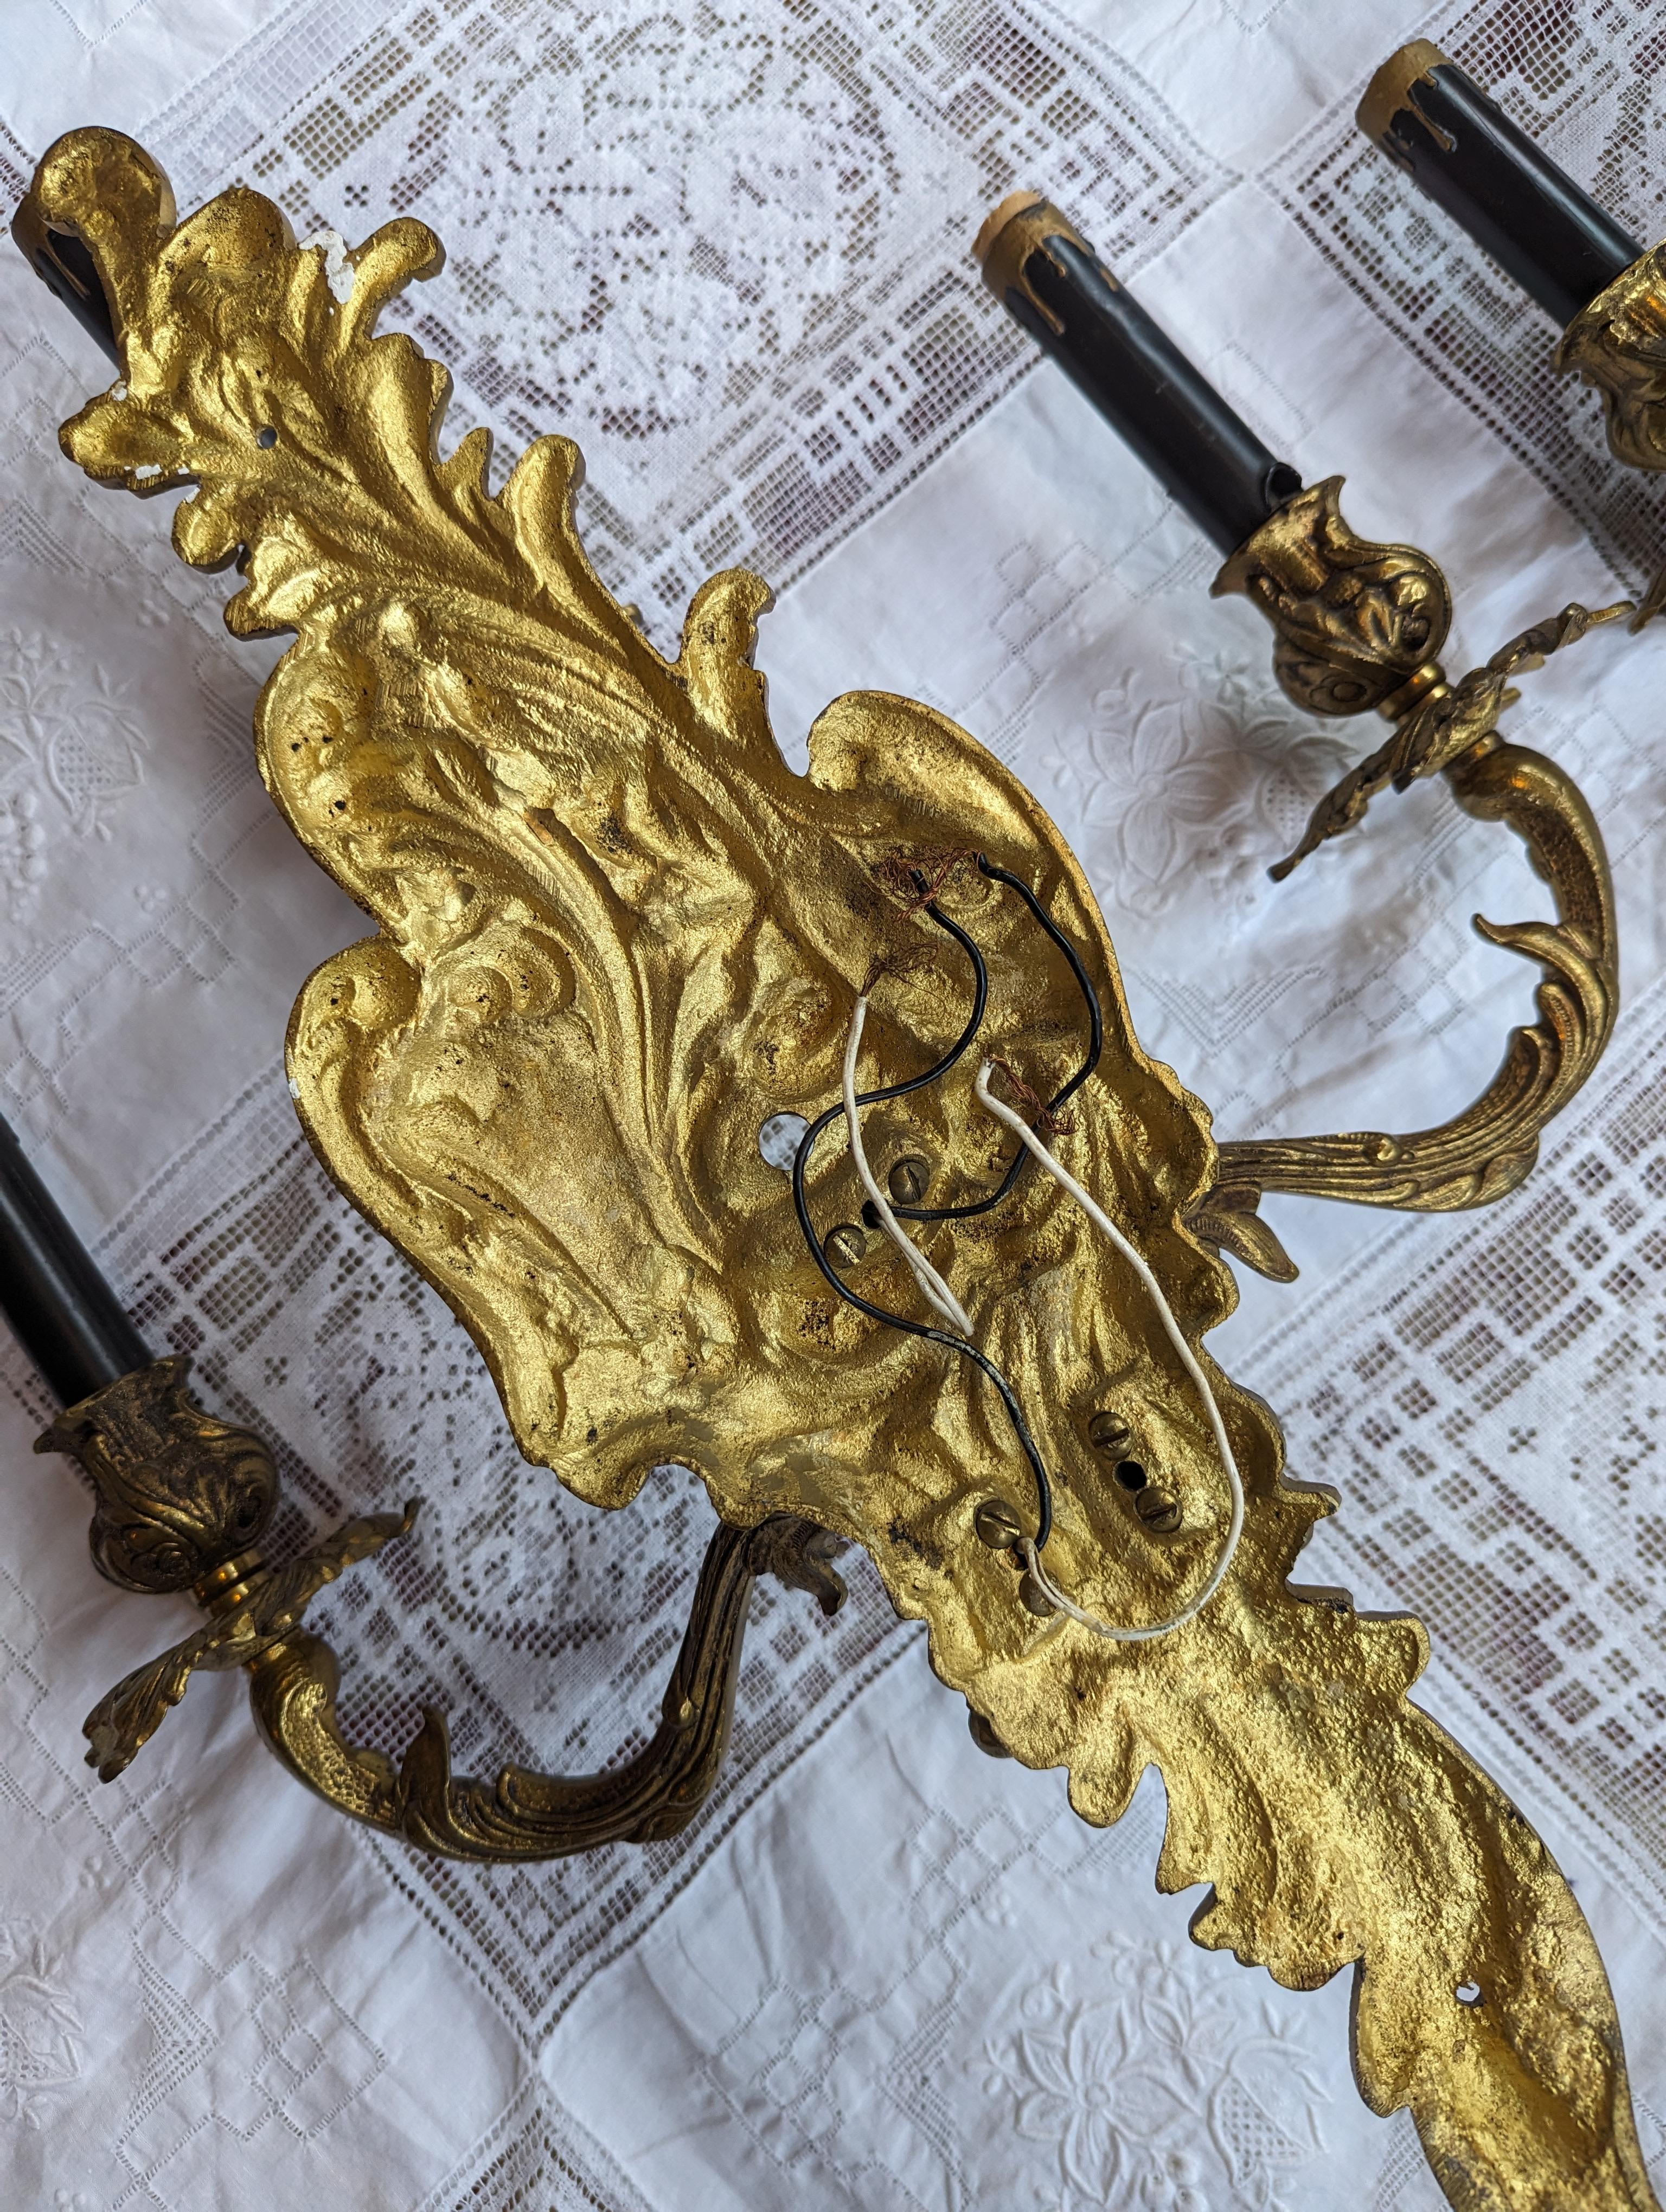 Pair of Antique French Gilded Sconces - 3 Light Armed Sconce European For Sale 2